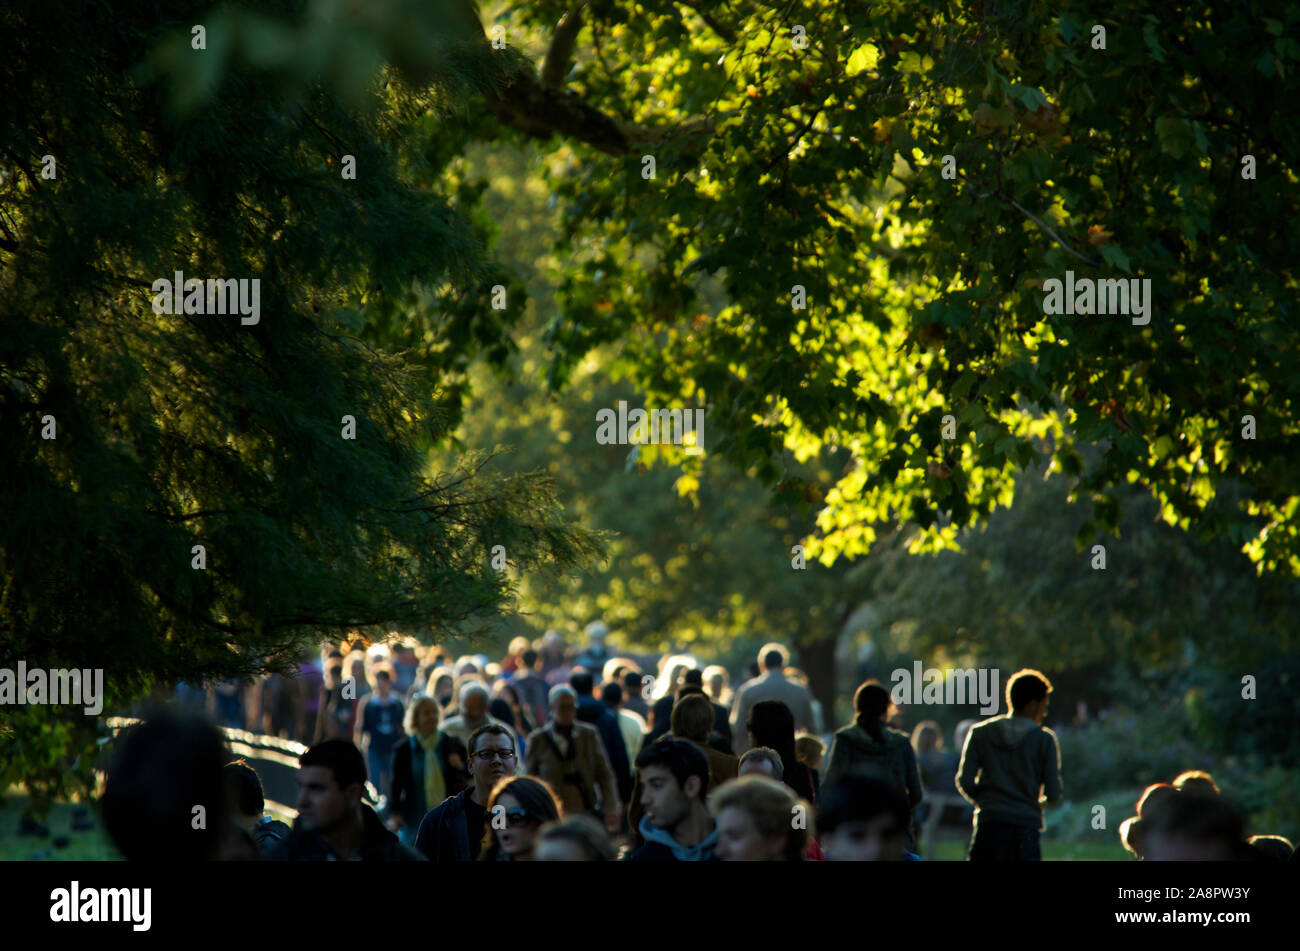 LONDON - OCTOBER 15, 2011: Crowds of people enjoy a sunny walk in the park on a warm autumn afternoon. Stock Photo